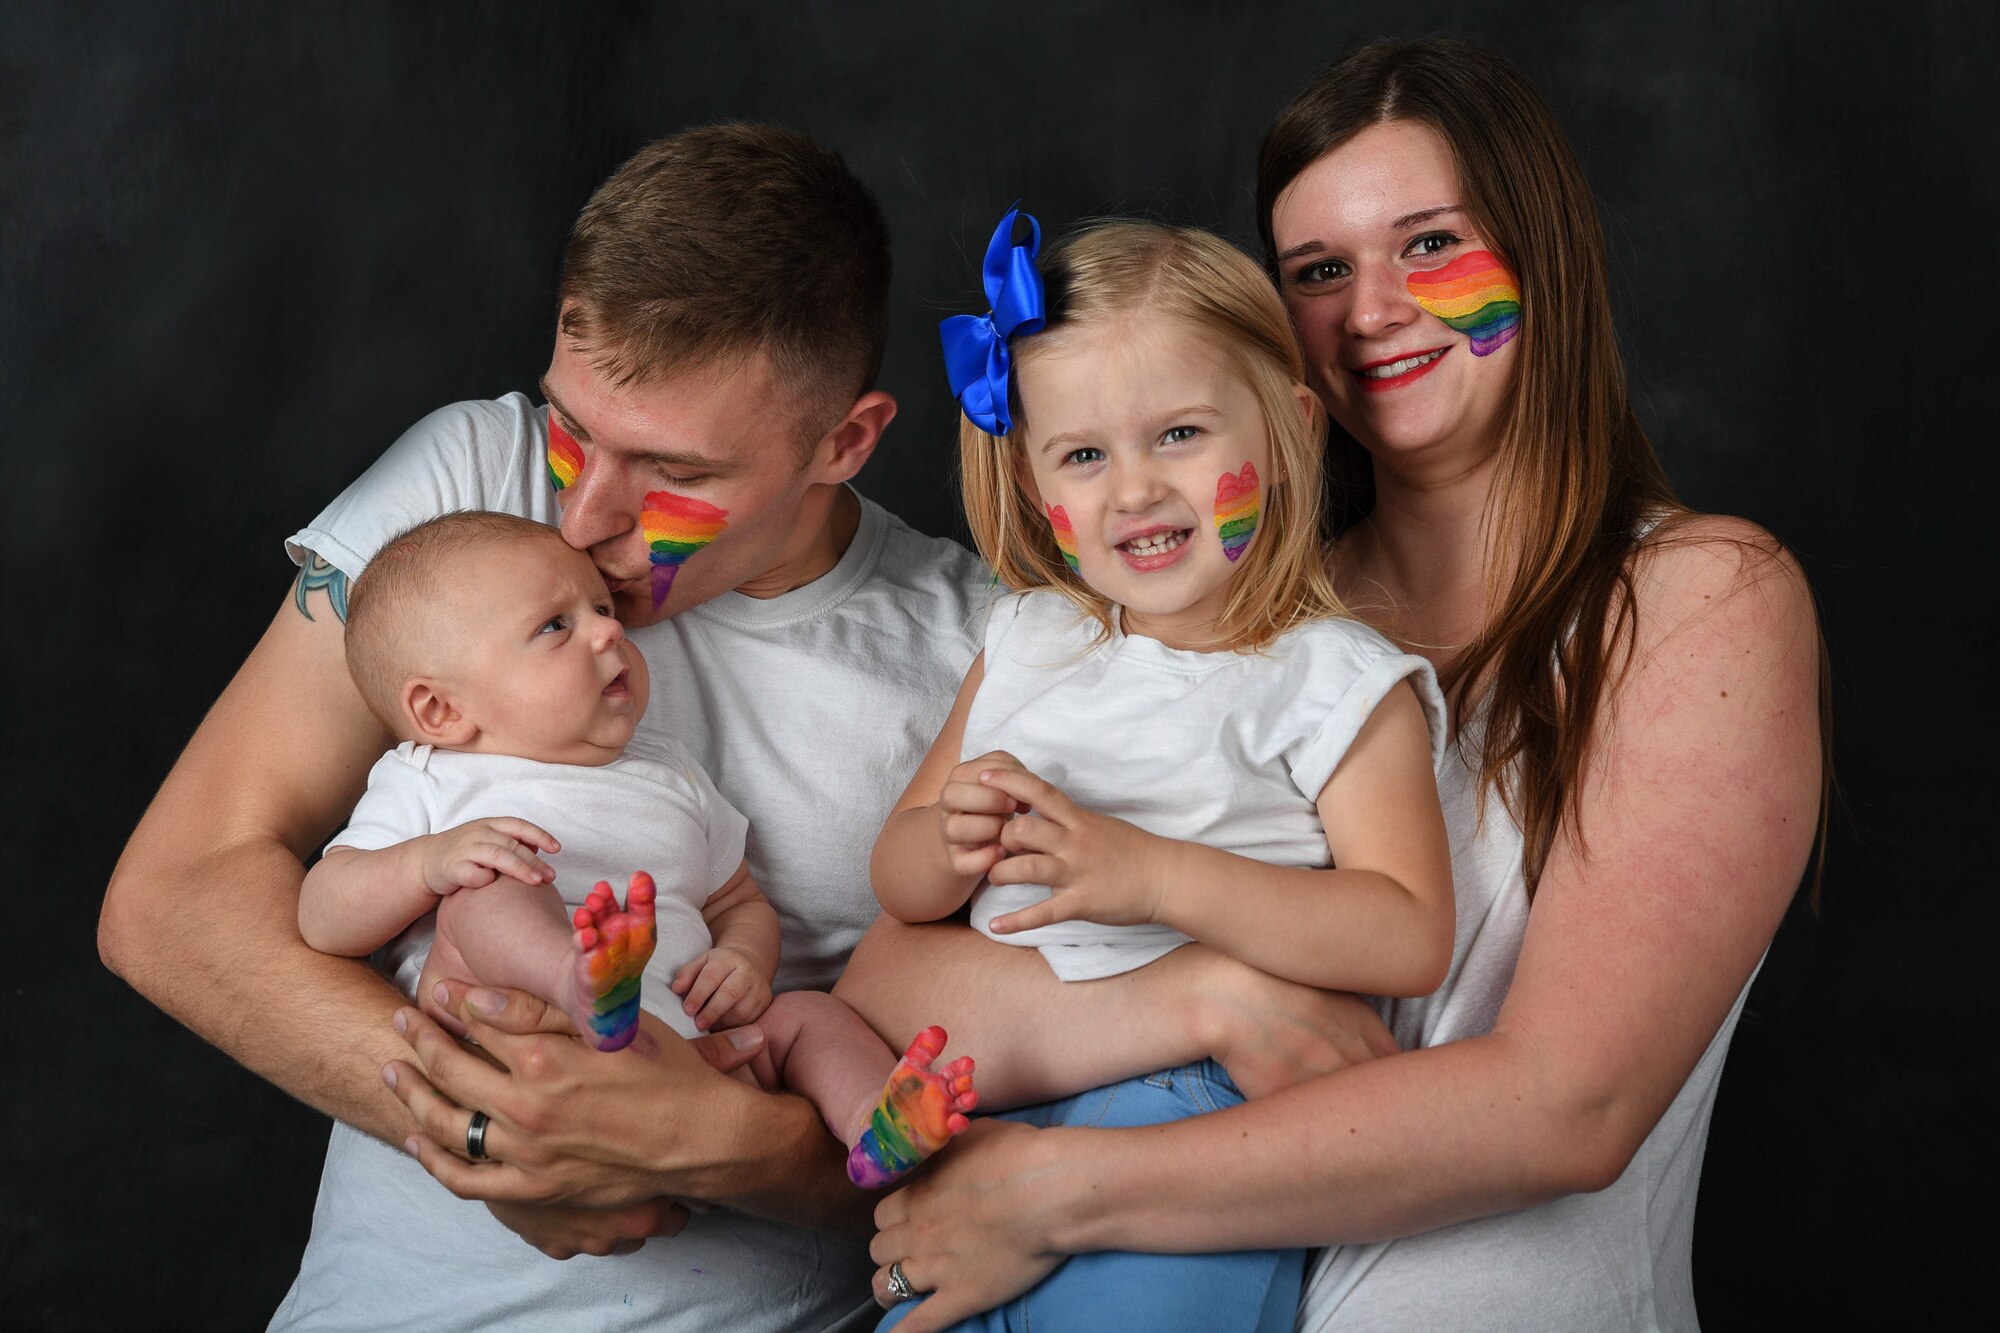 “There is nothing more human than loving someone who is also human. We just so happened to fall in love with each other.” – U.S. Air Force Senior Airman Devin Boyer, 86th Airlift Wing Public Affairs photojournalist with his wife, Blakely and their two children Annabel and Ronan. 